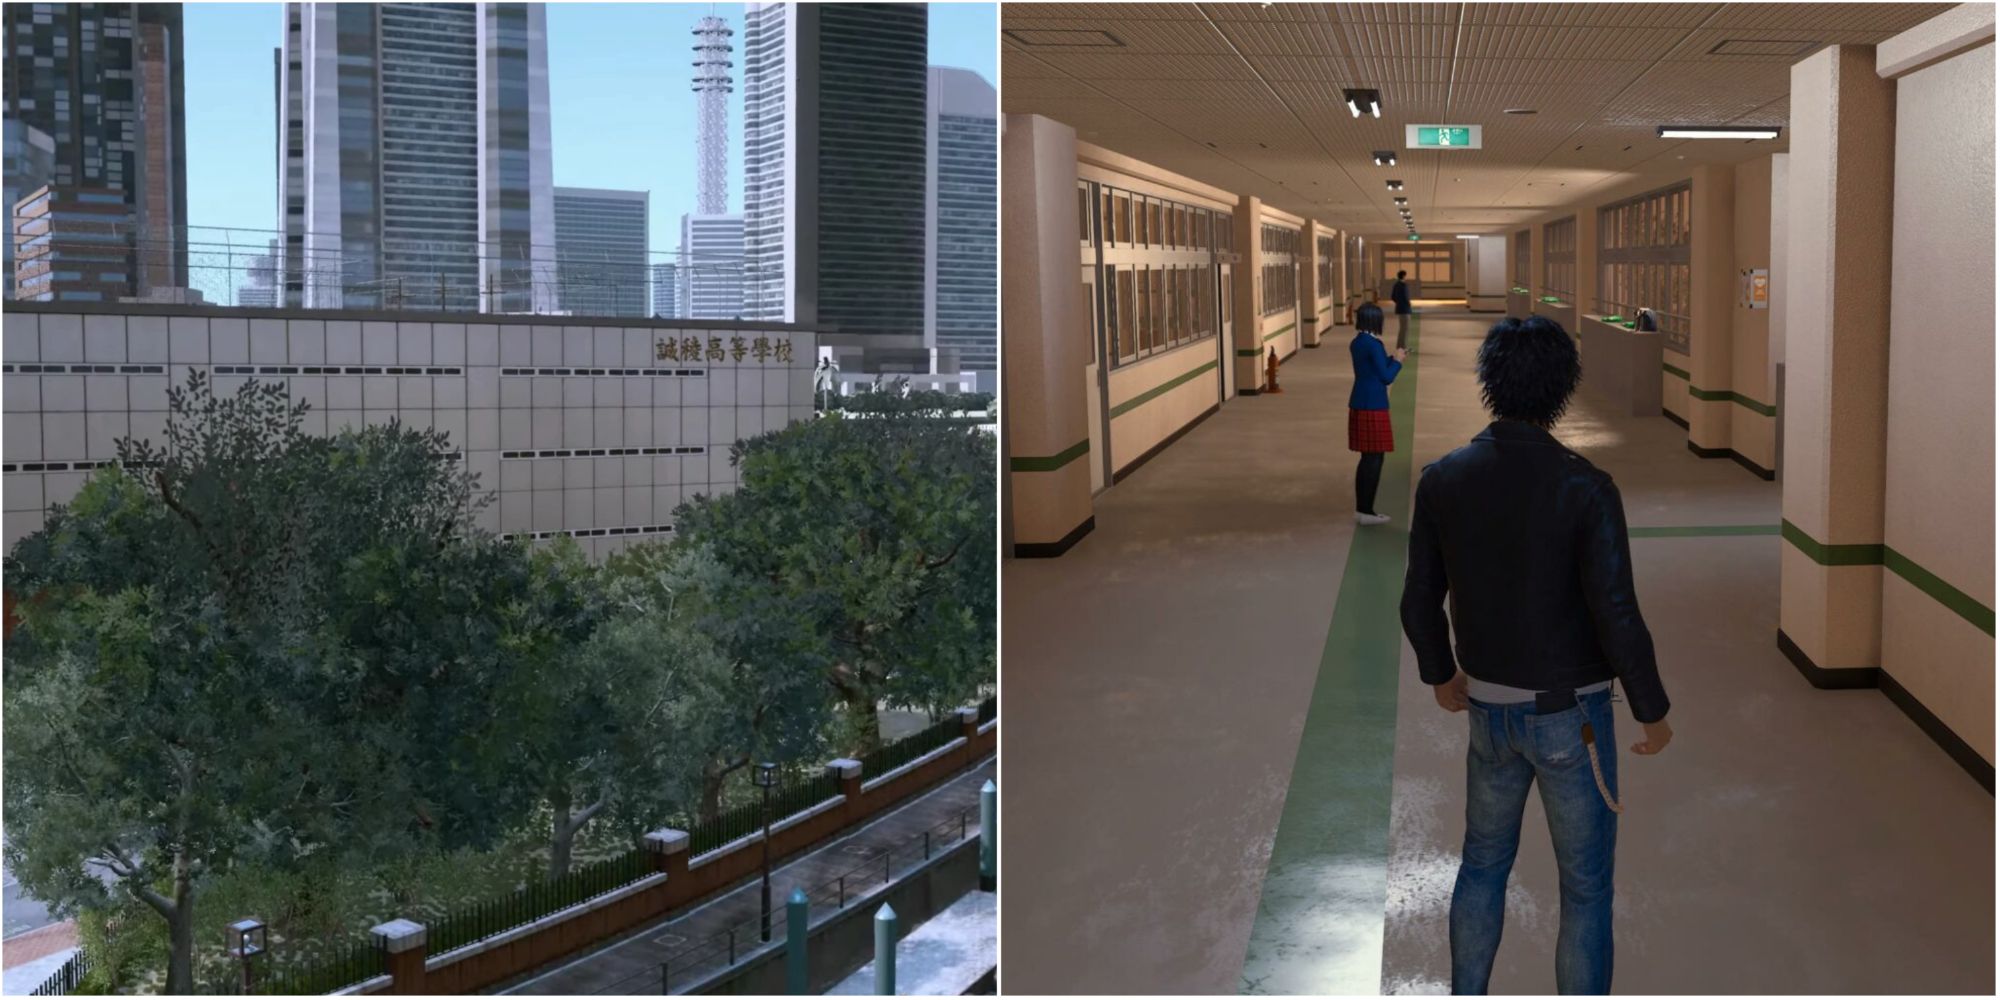 Collage of outside Seiryo High School and Takayuki Yagami walking in the school's hallway in Lost Judgment